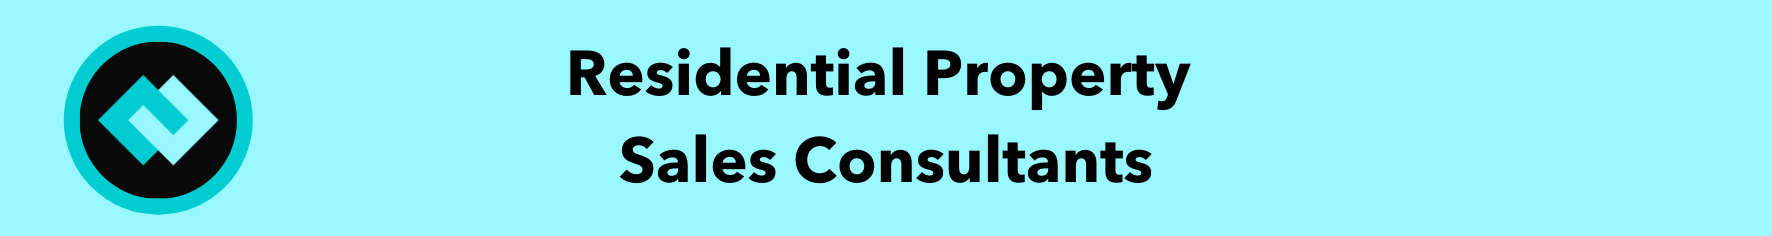 Residential Property Sales Consultants